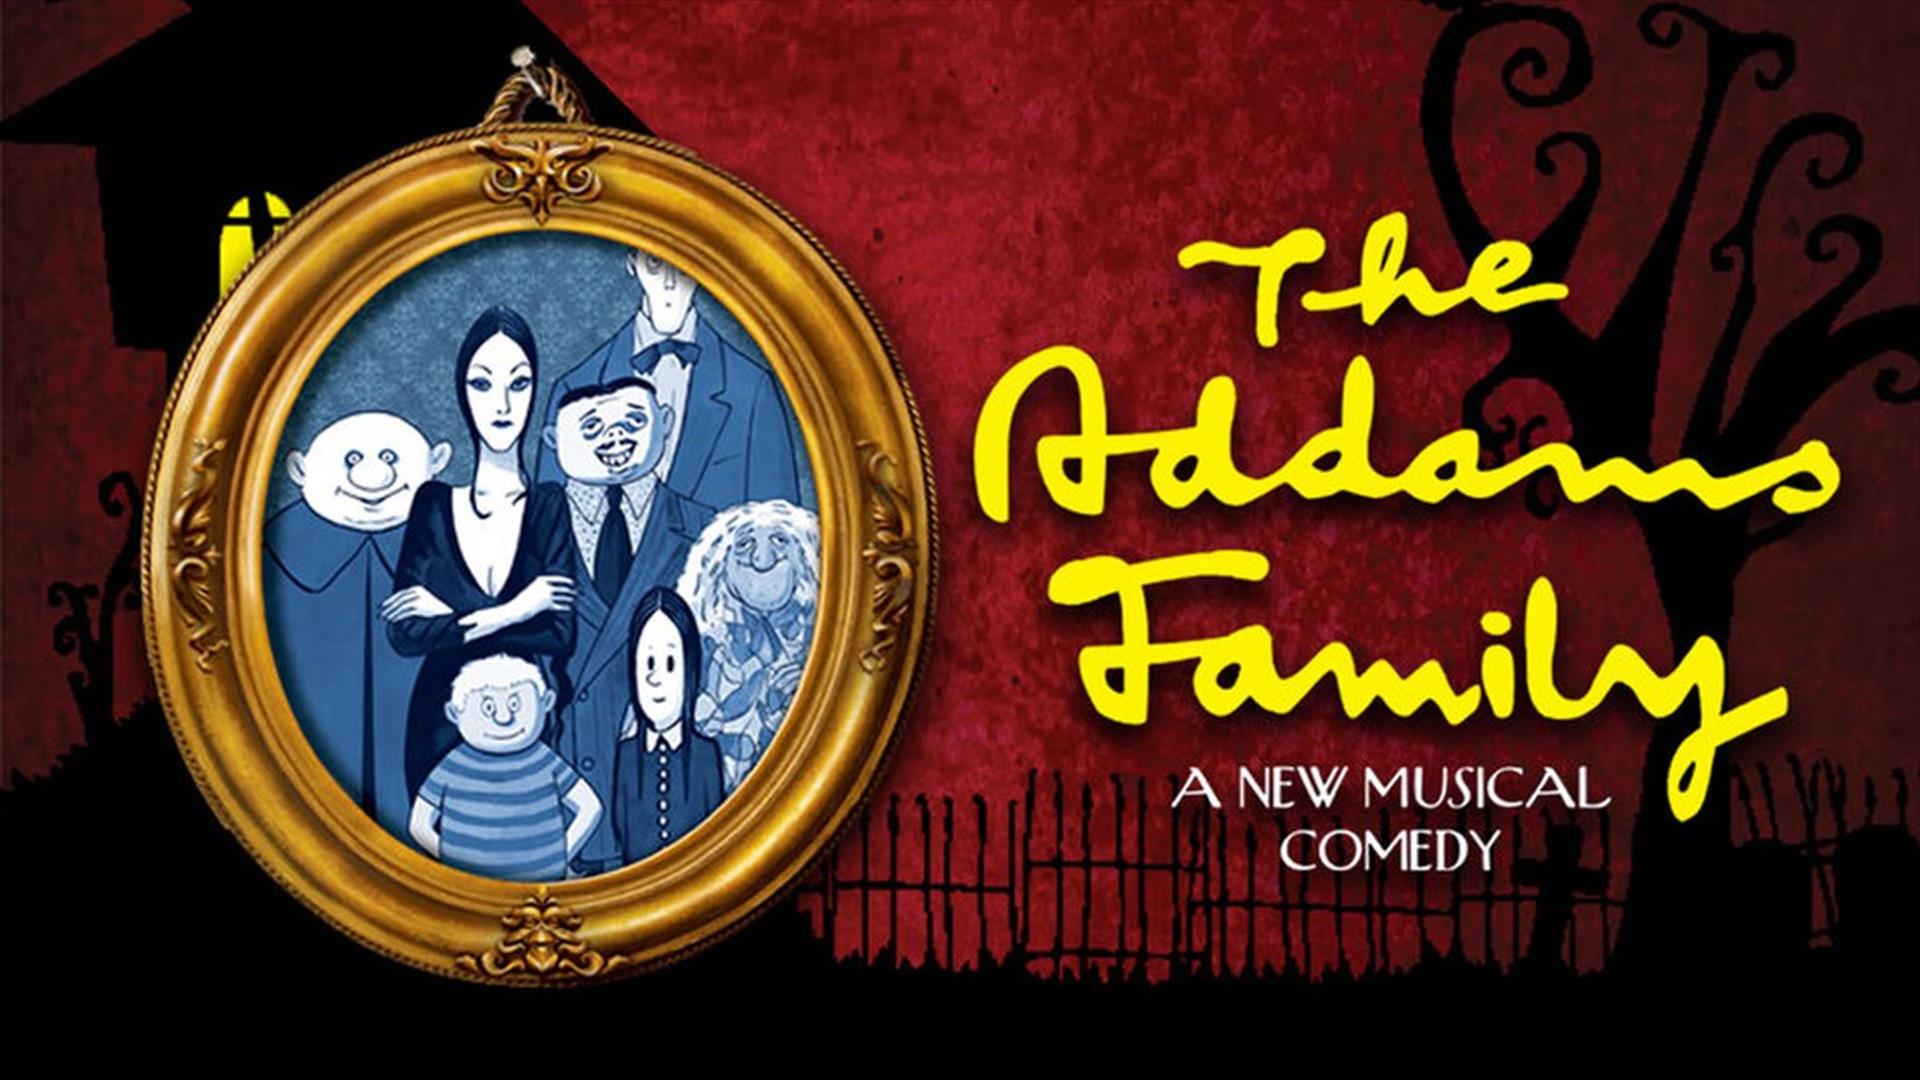 Image is of a poster advertising The Addams Family musical comedy at Lagan Valley Island